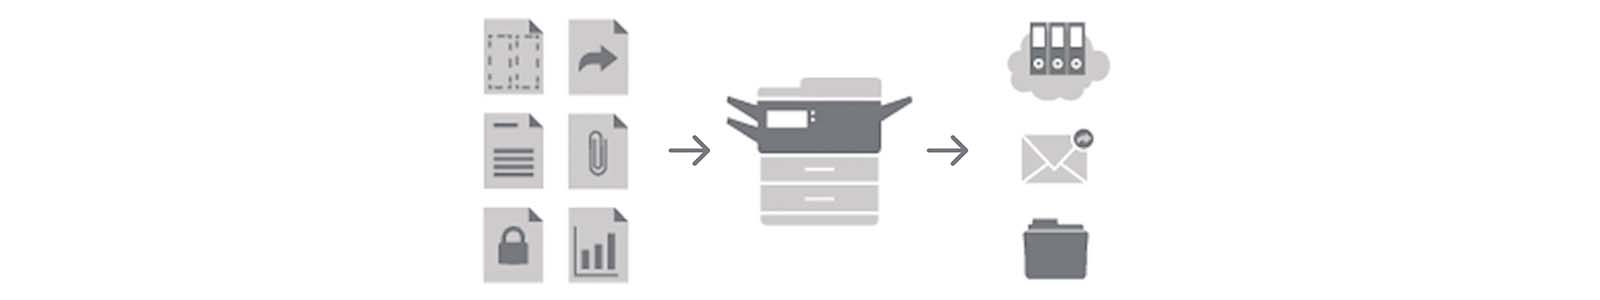 Using a multi-function printer to scan documents to the cloud